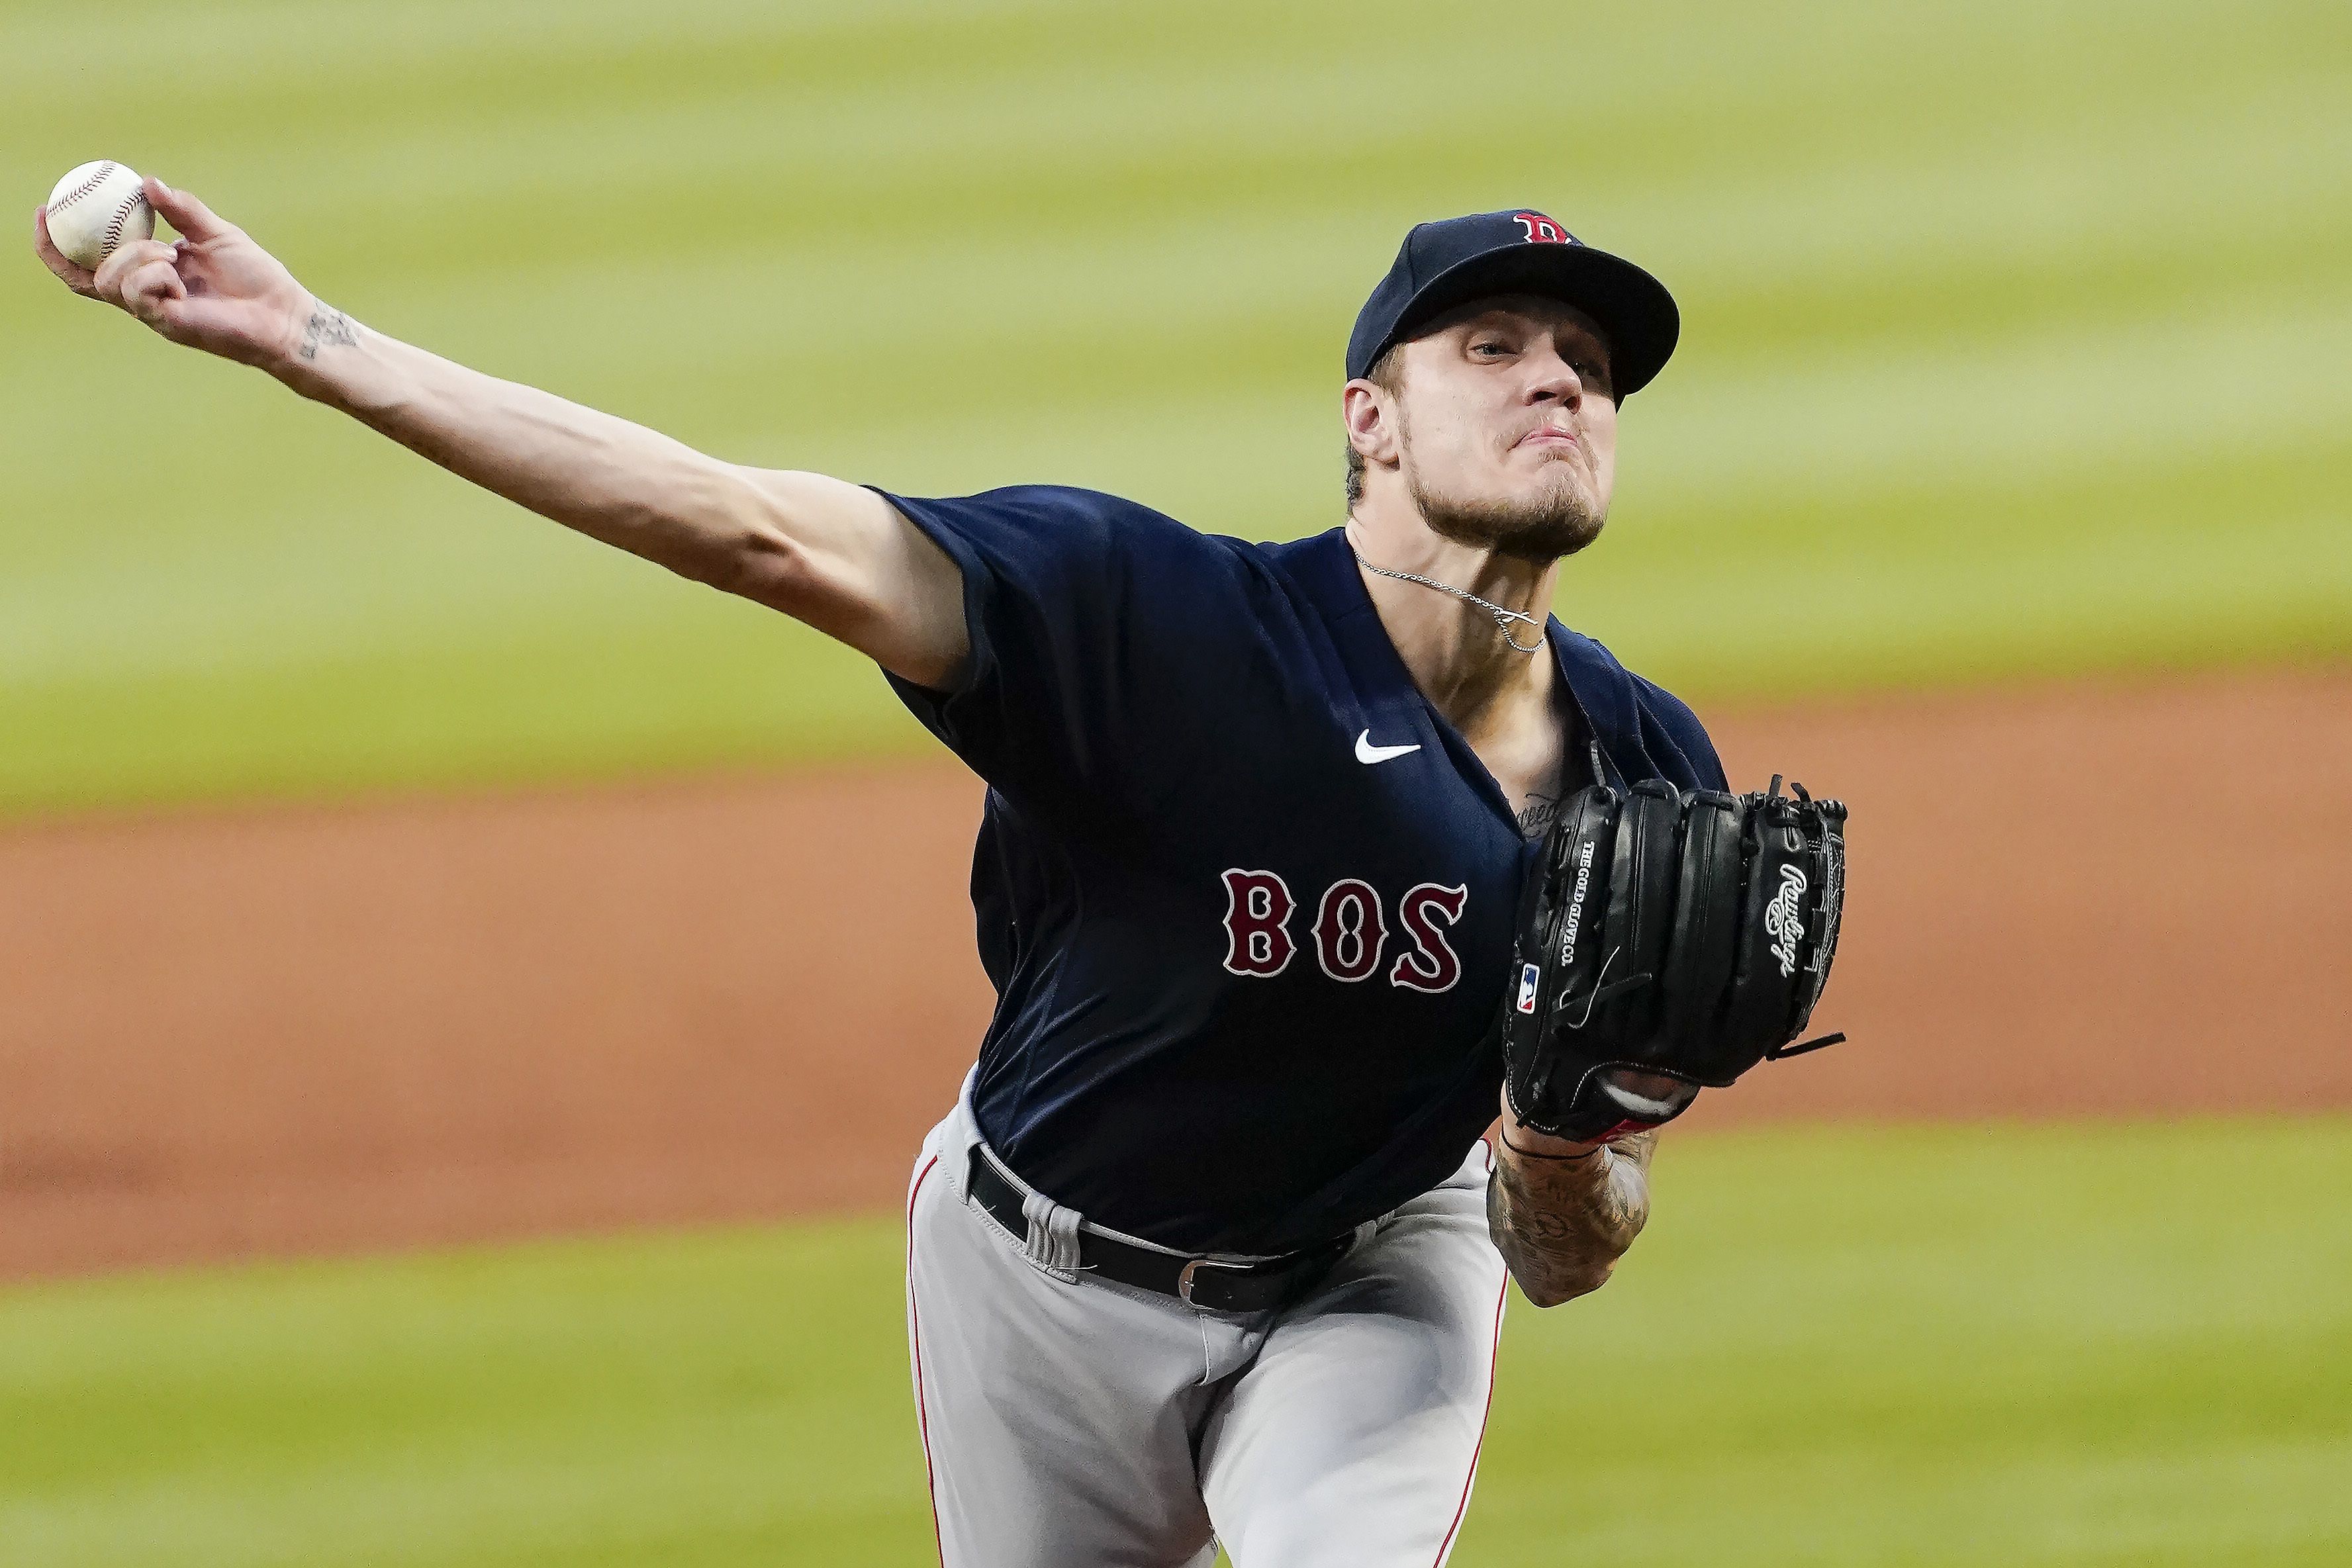 Red Sox pitcher Tanner Houck off to historic start to MLB career